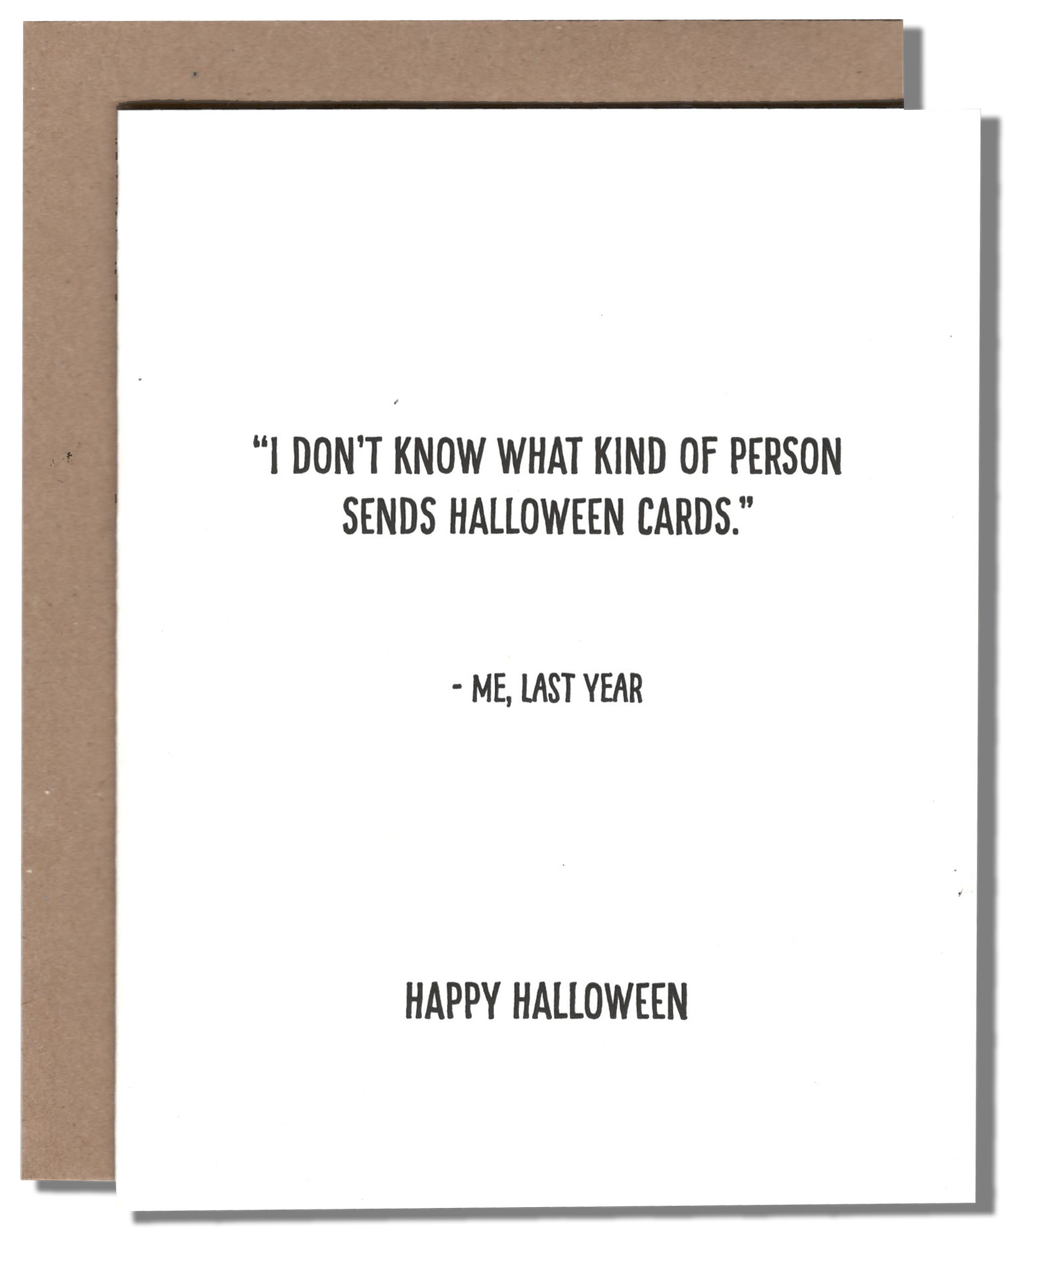 Power and Light Letterpress - PLL What Kind of Person Halloween Card